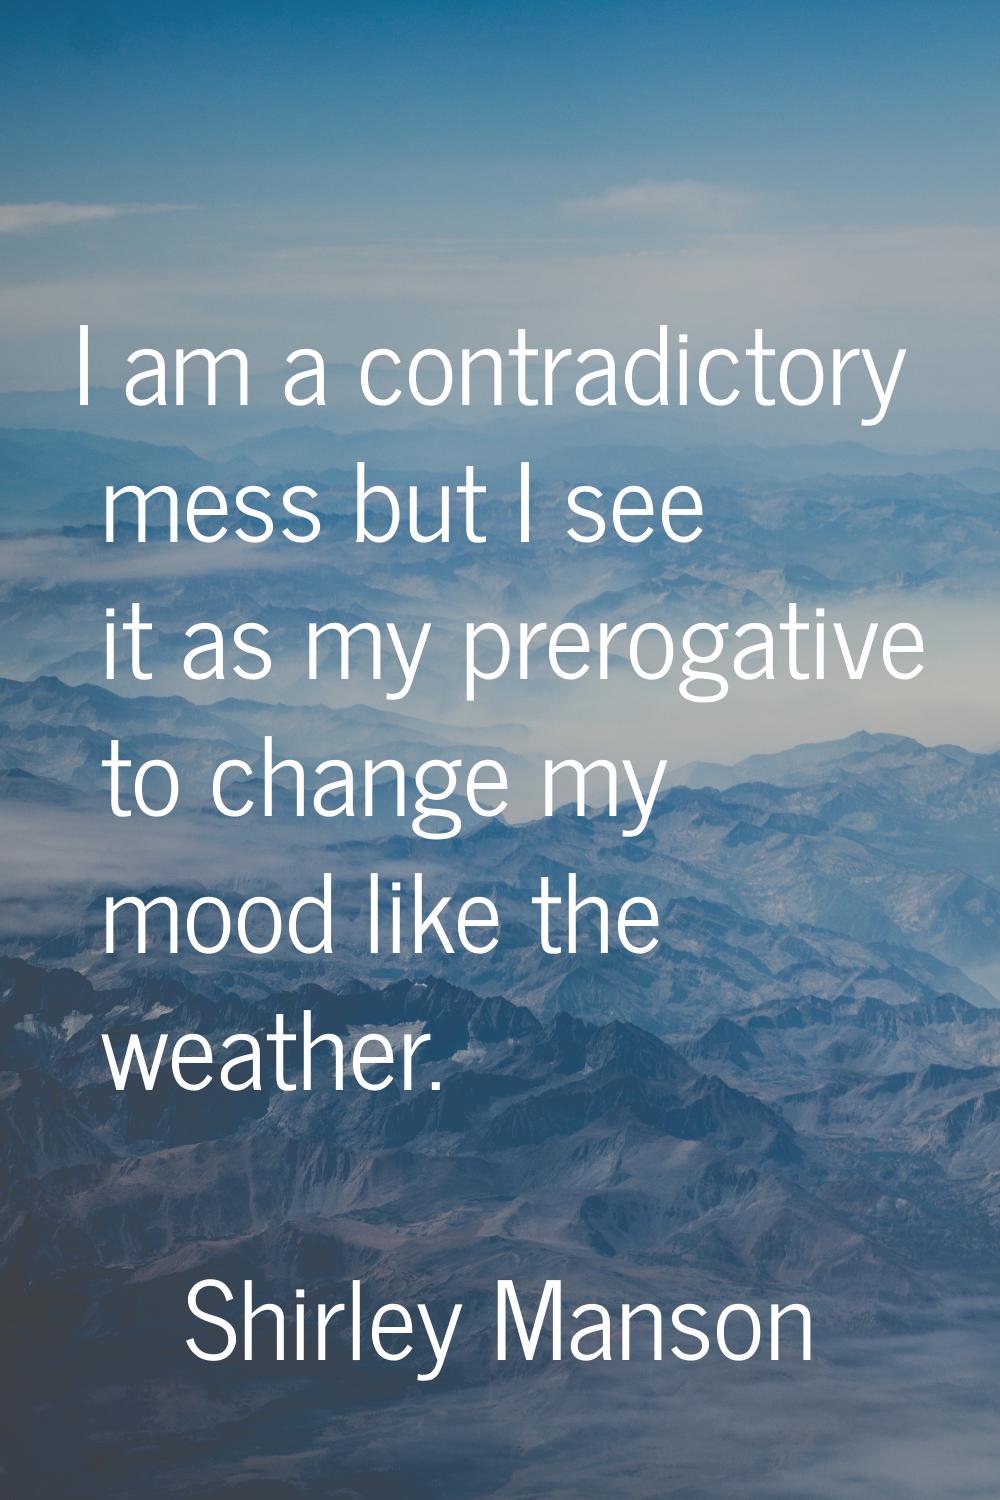 I am a contradictory mess but I see it as my prerogative to change my mood like the weather.